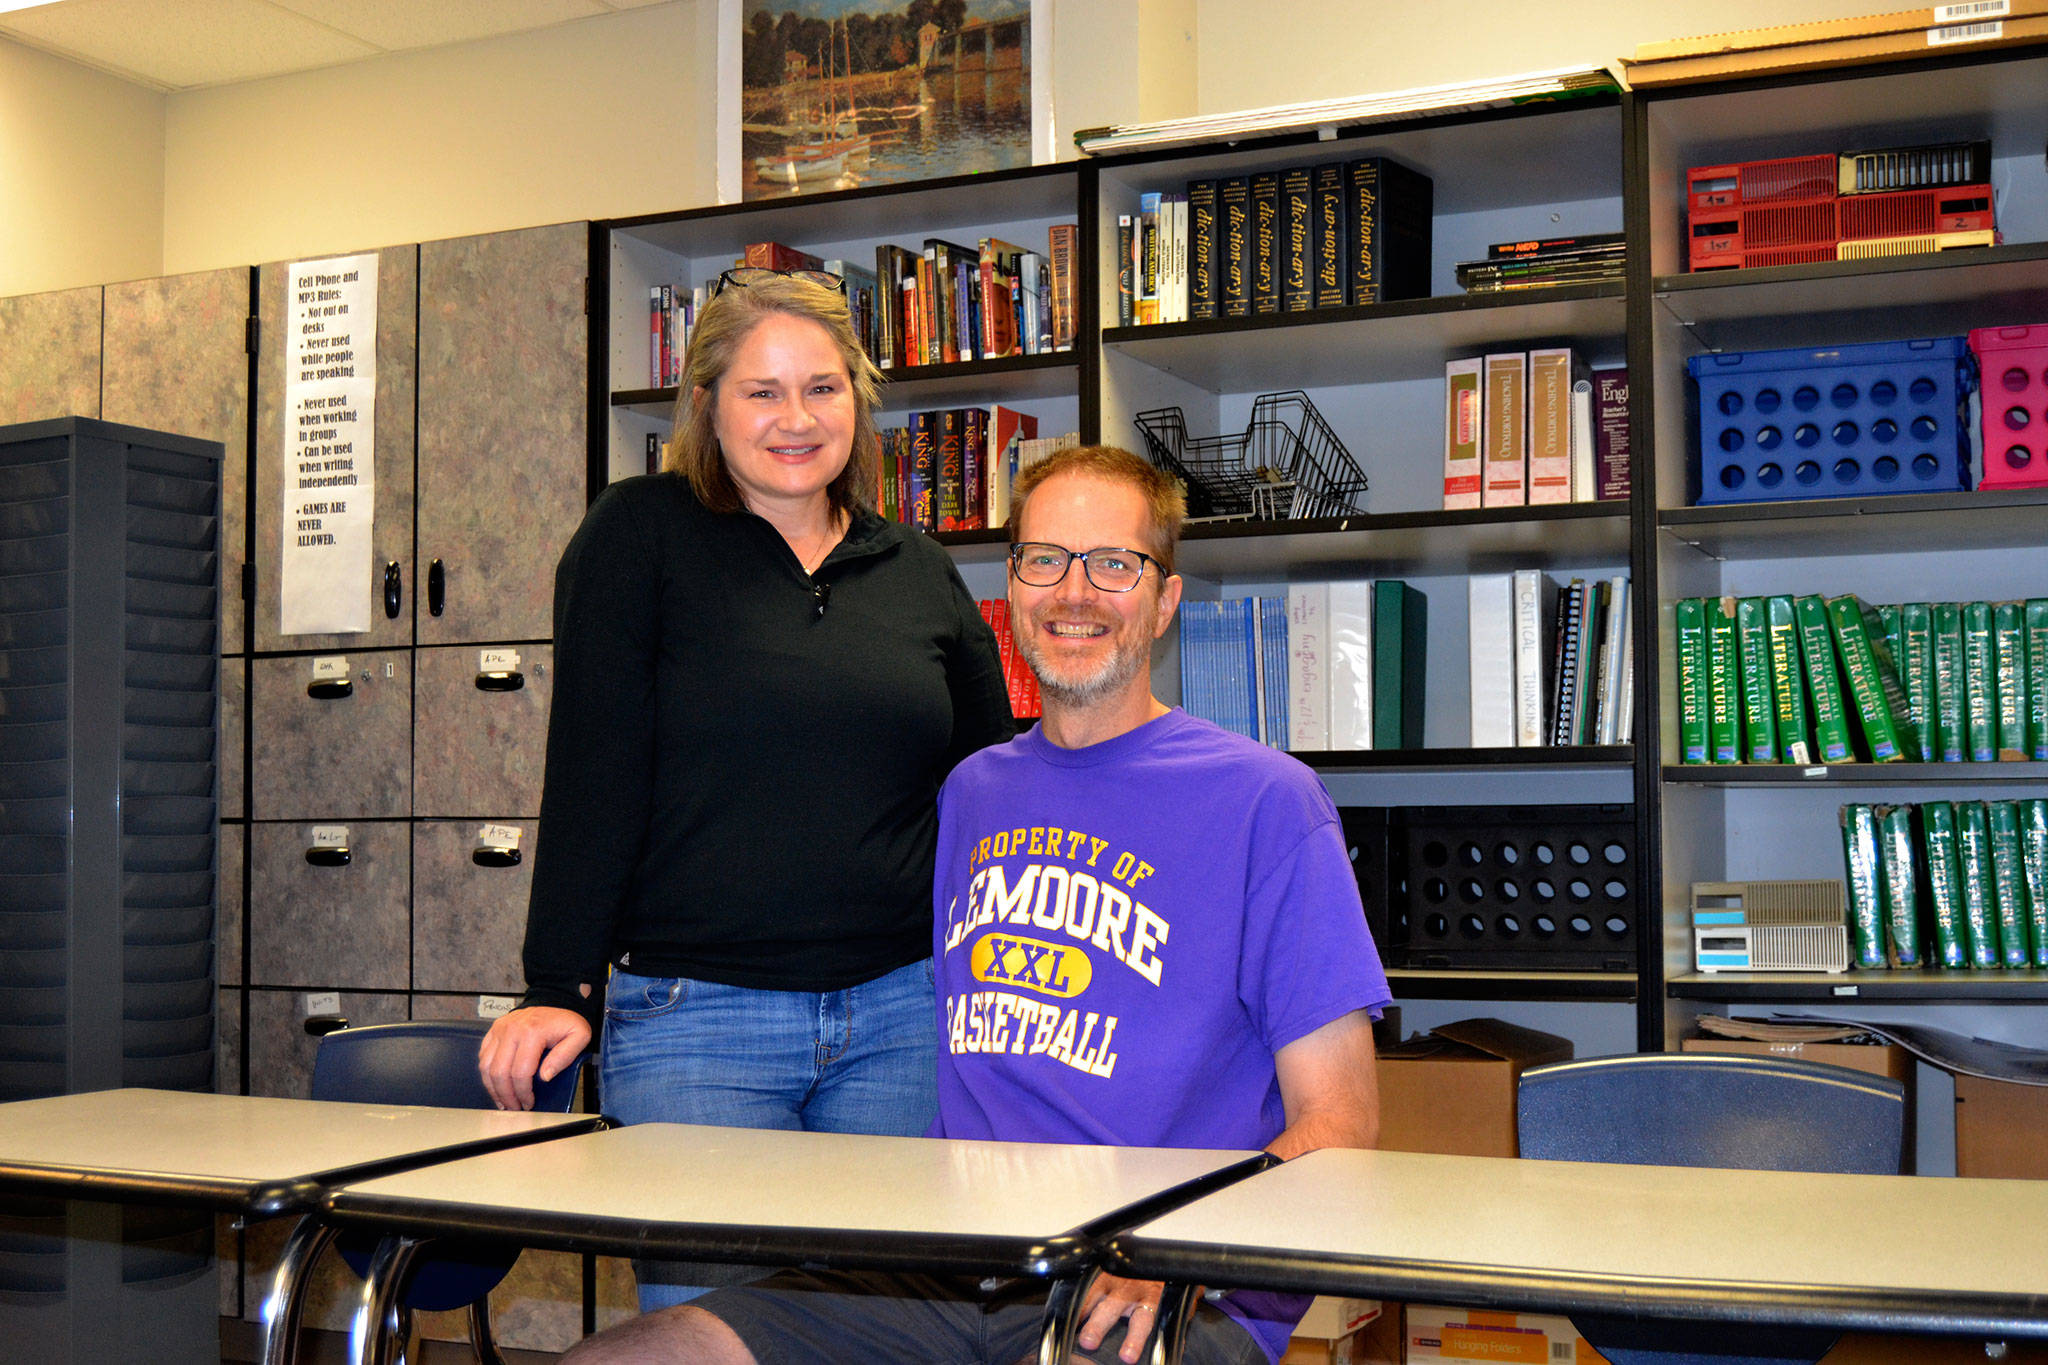 Jon and Cheryl Eekhoff say they are ready to start the school year at Sequim High School after taking some time off last school year following Jon’s fall from a ladder in which he sustained head trauma. Jon will teach ninth grade English and Cheryl 10th grade English. (Matthew Nash/Olympic Peninsula News Group)